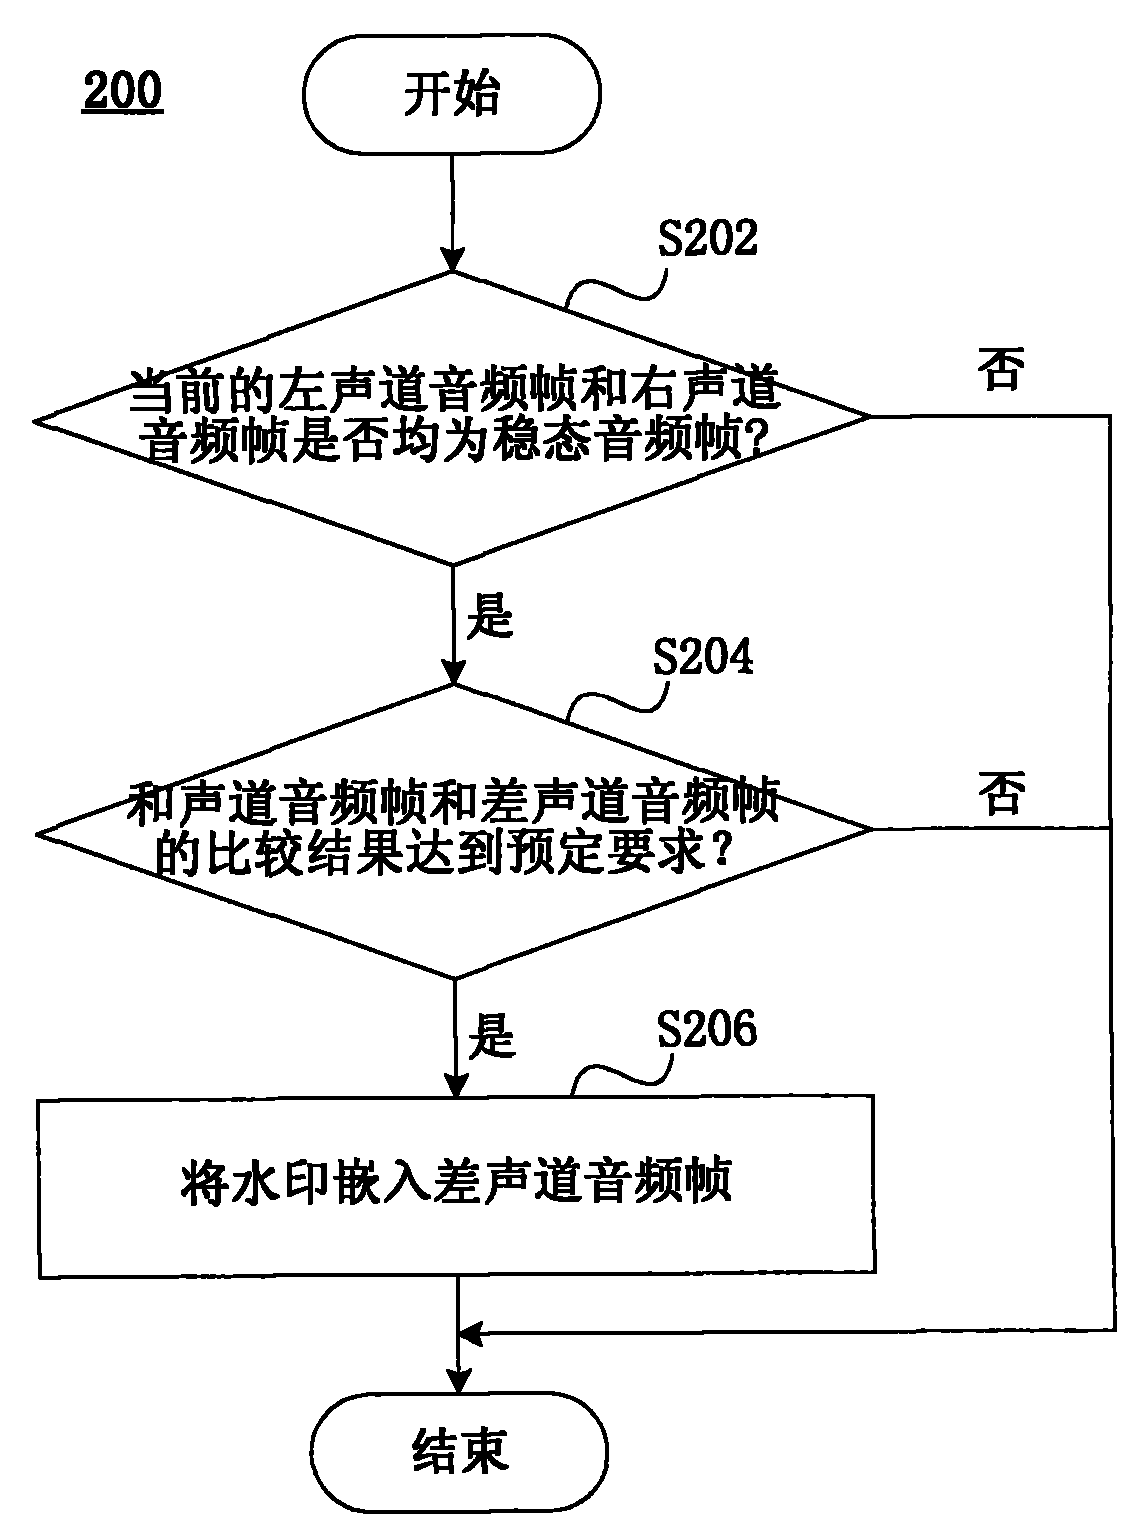 Method and device for embedding watermark in audio signal